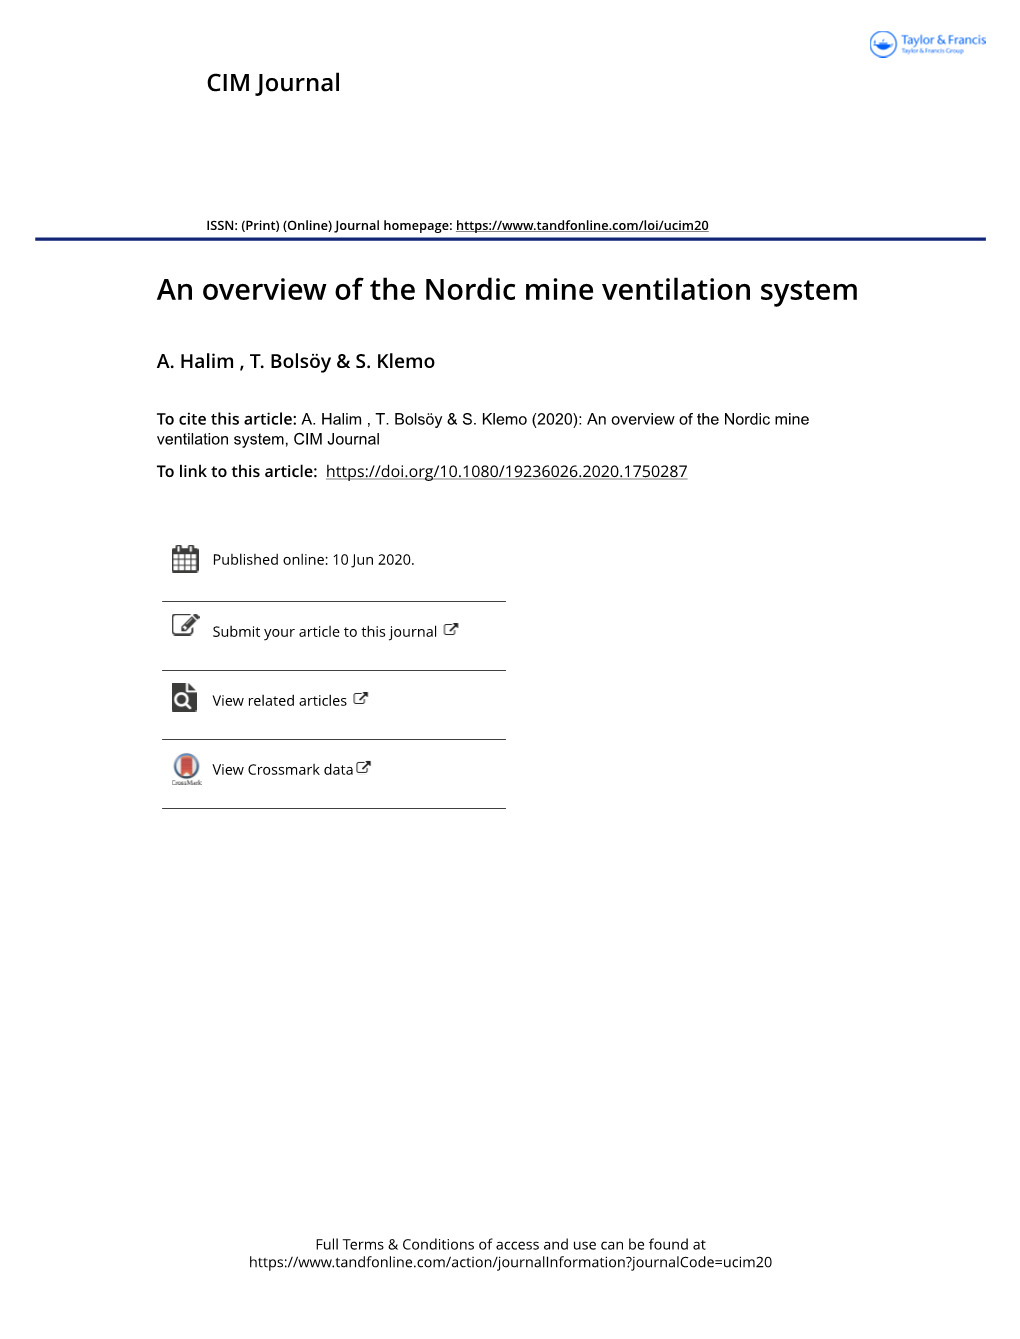 An Overview of the Nordic Mine Ventilation System